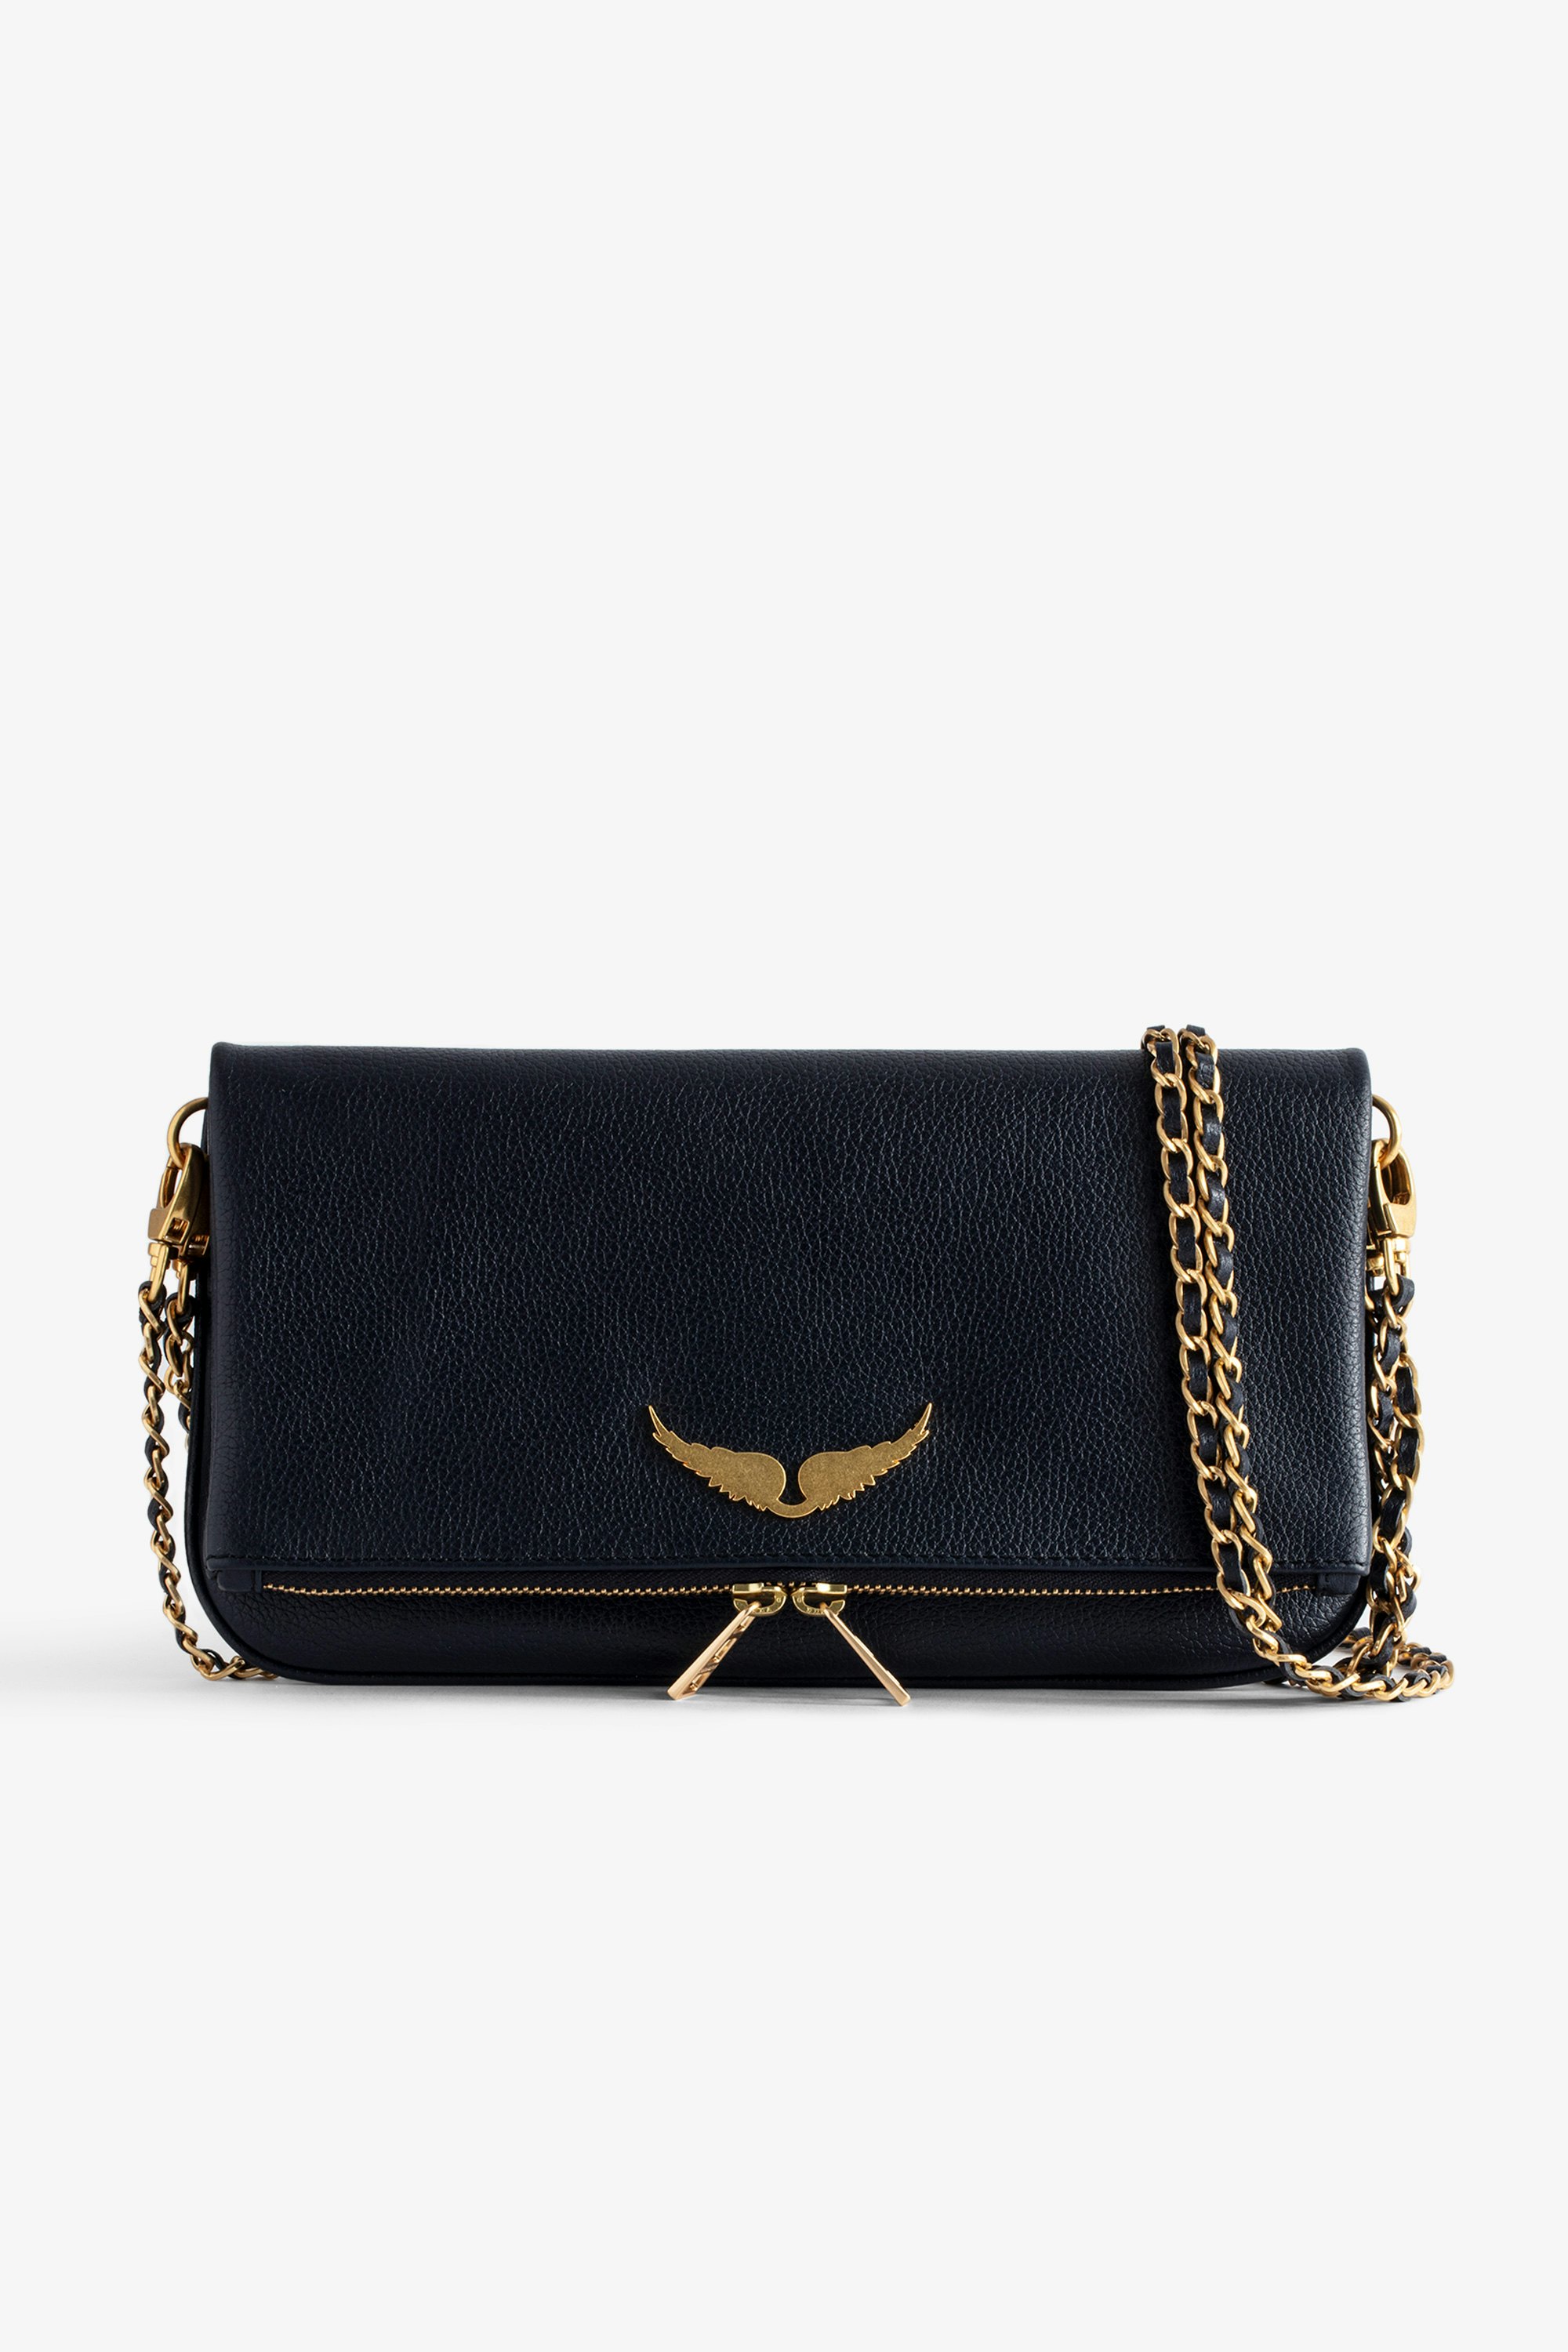 Rock Clutch Women’s navy blue grained leather clutch with double leather and metal chain strap.